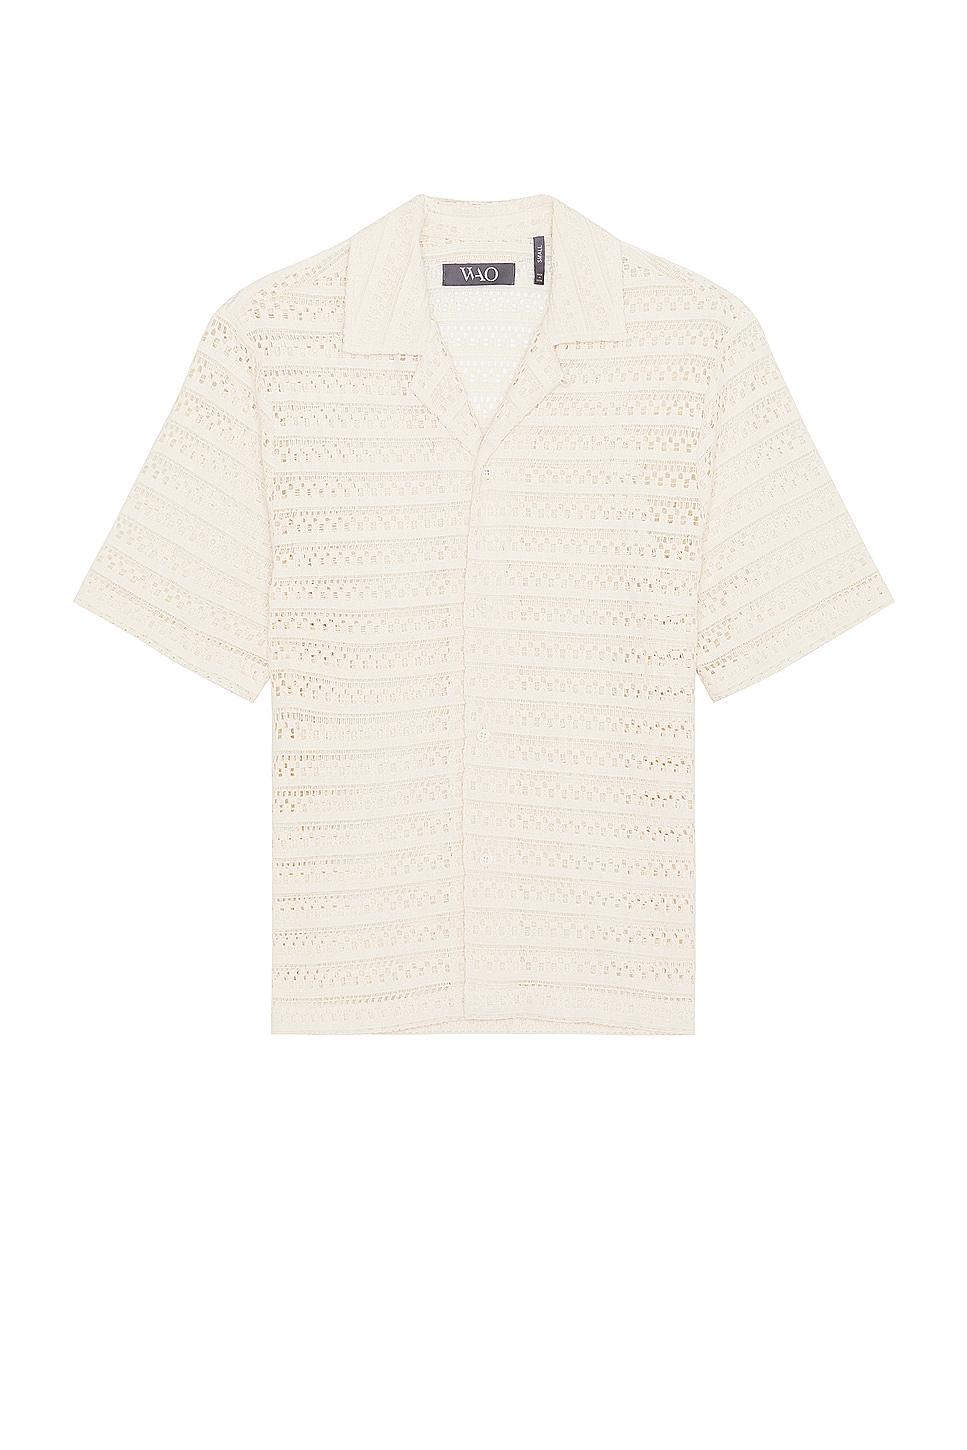 Image 1 of WAO Crochet Camp Shirt in Natural